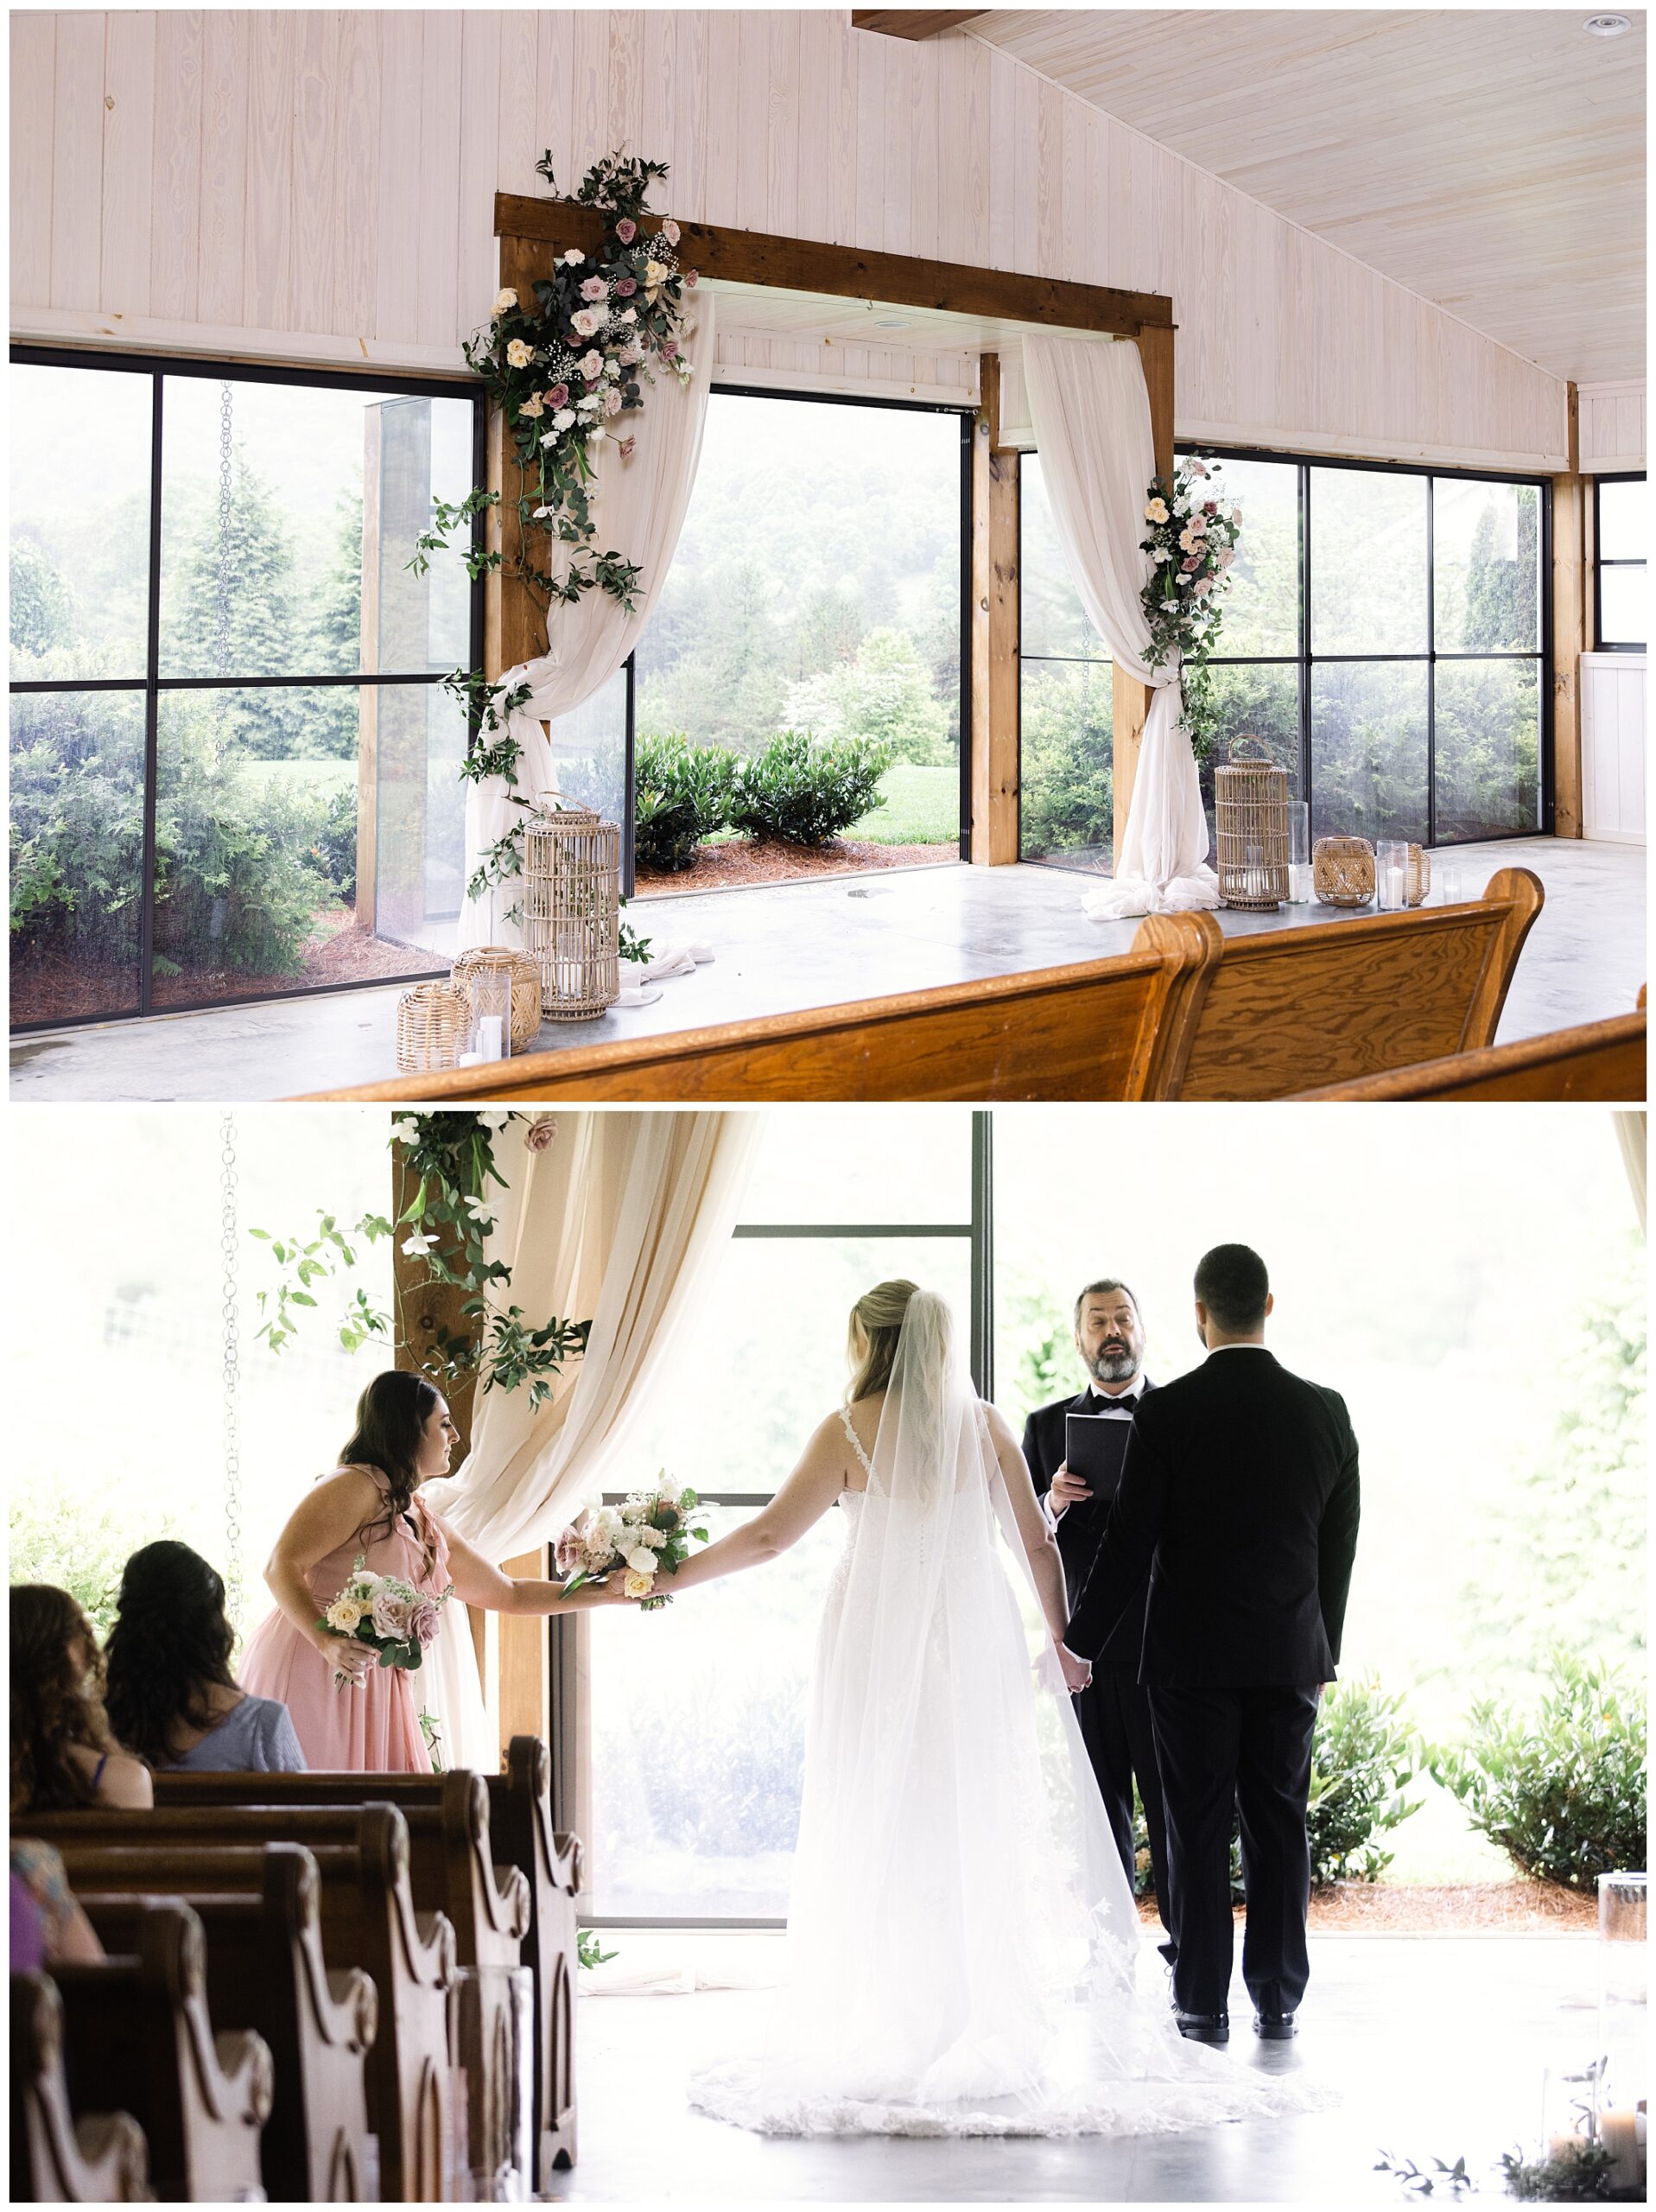 A bride and groom holding hands at the altar during a mountain wedding ceremony at Chestnut Ridge, with guests seated and décor including floral arrangements in a well-lit venue with large windows.